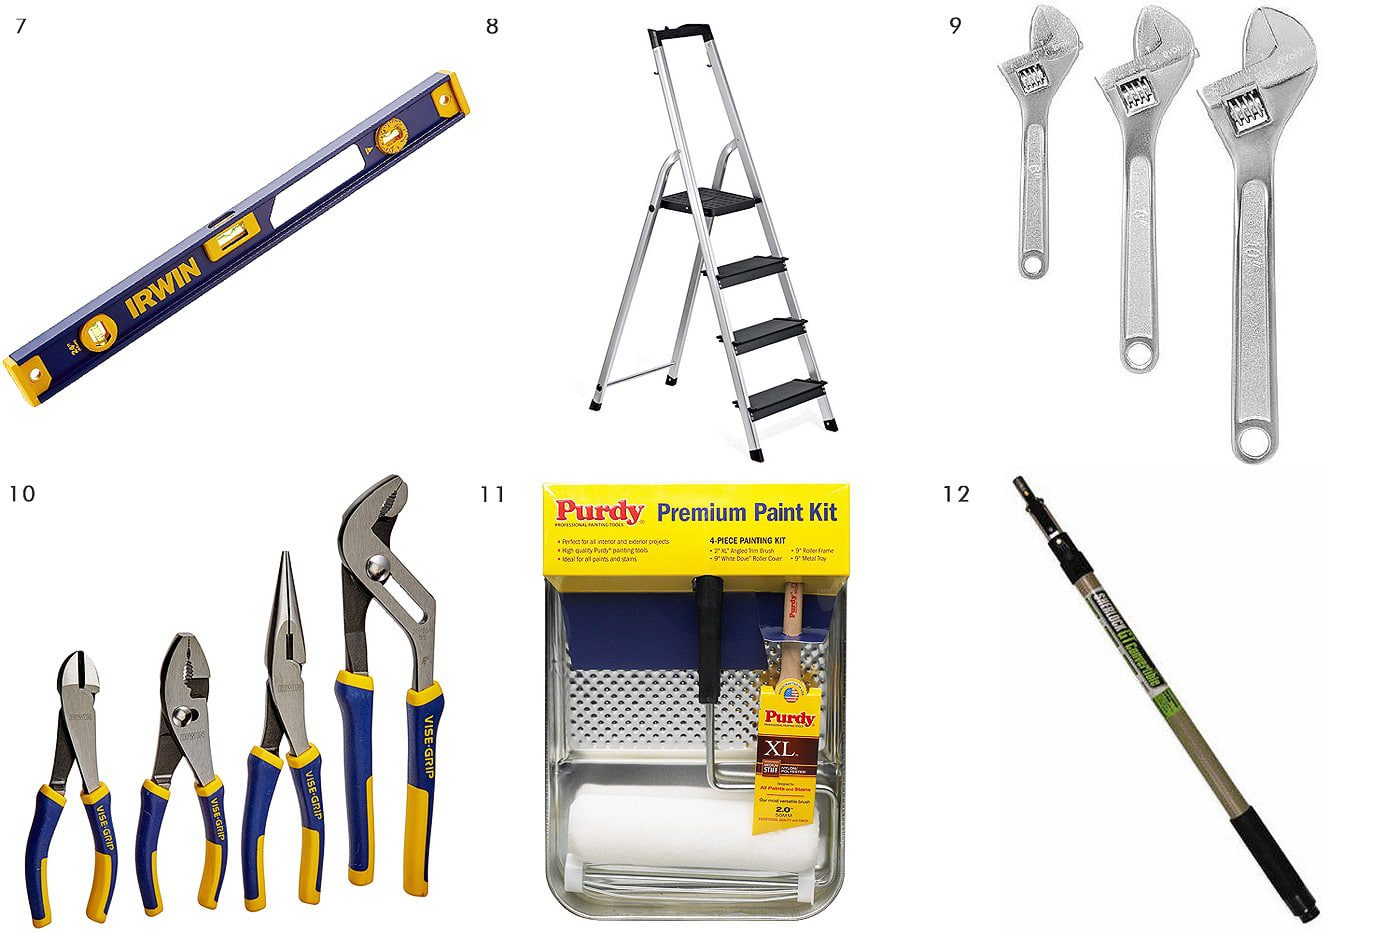 Building your tool library | via Yellow Brick Home